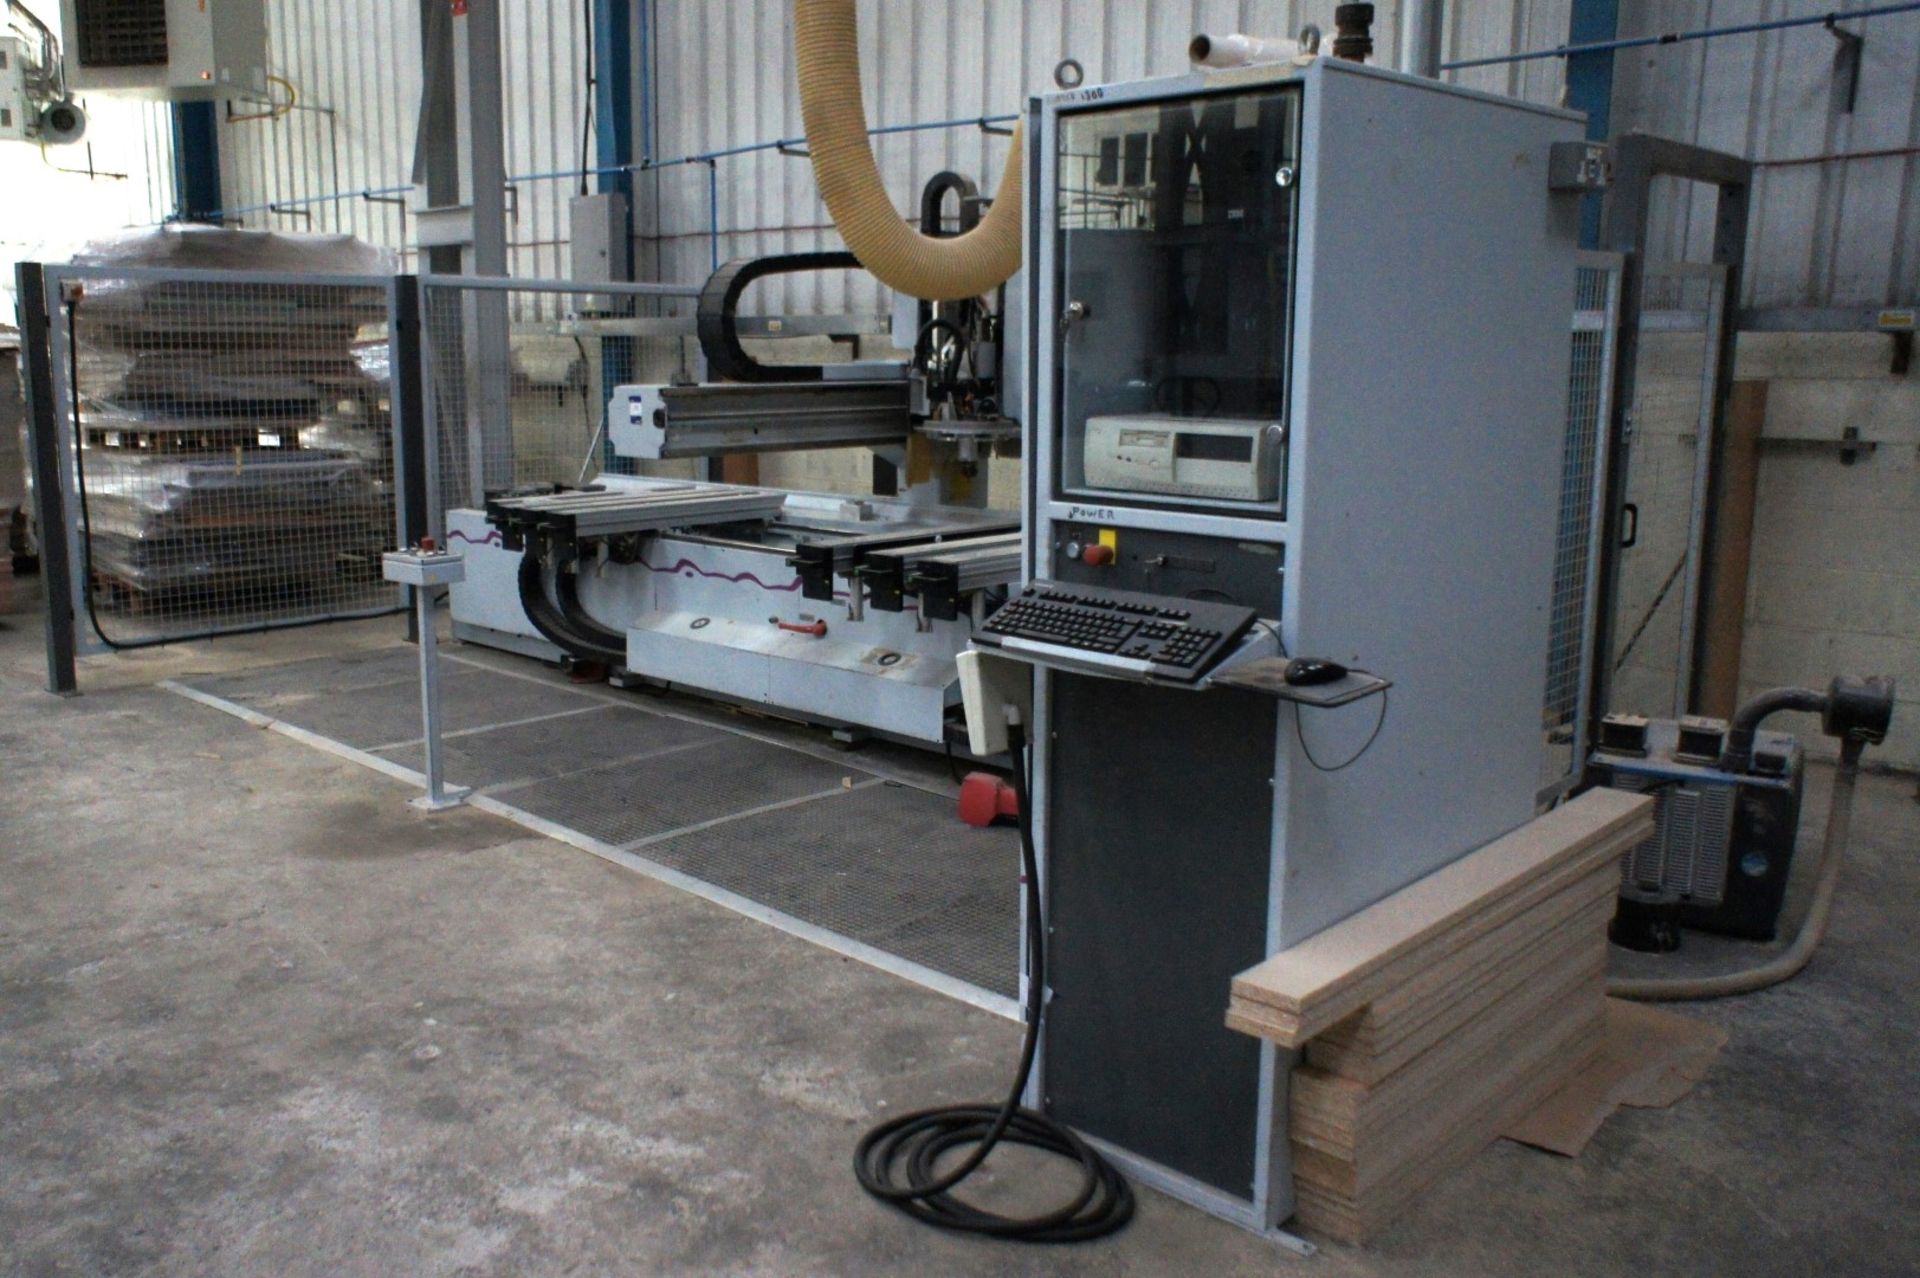 * Weeke Optimat BHC350 serial No 0-250-18-0322 CNC Woodworking Machine; YOM 2003. Please note - Image 4 of 11